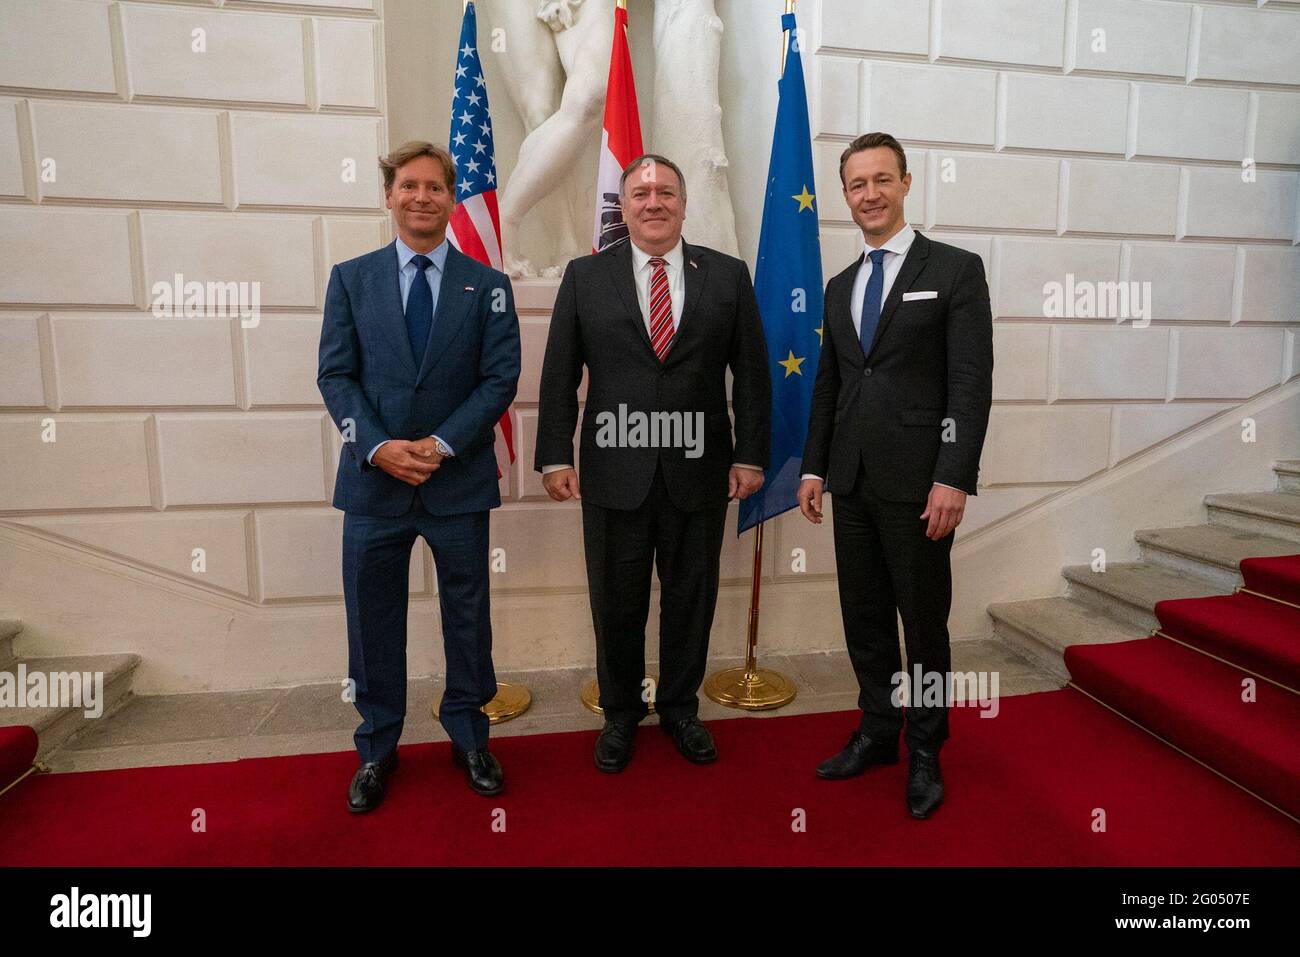 Secretary of State Michael R. Pompeo arrives for a business roundtable with Austrian Finance Minister Gernot Bluemel, United States Ambassador to the Republic of Austria Trevor D. Traina, and Austrian companies, in Vienna, Austria, on August 14, 2020 Stock Photo